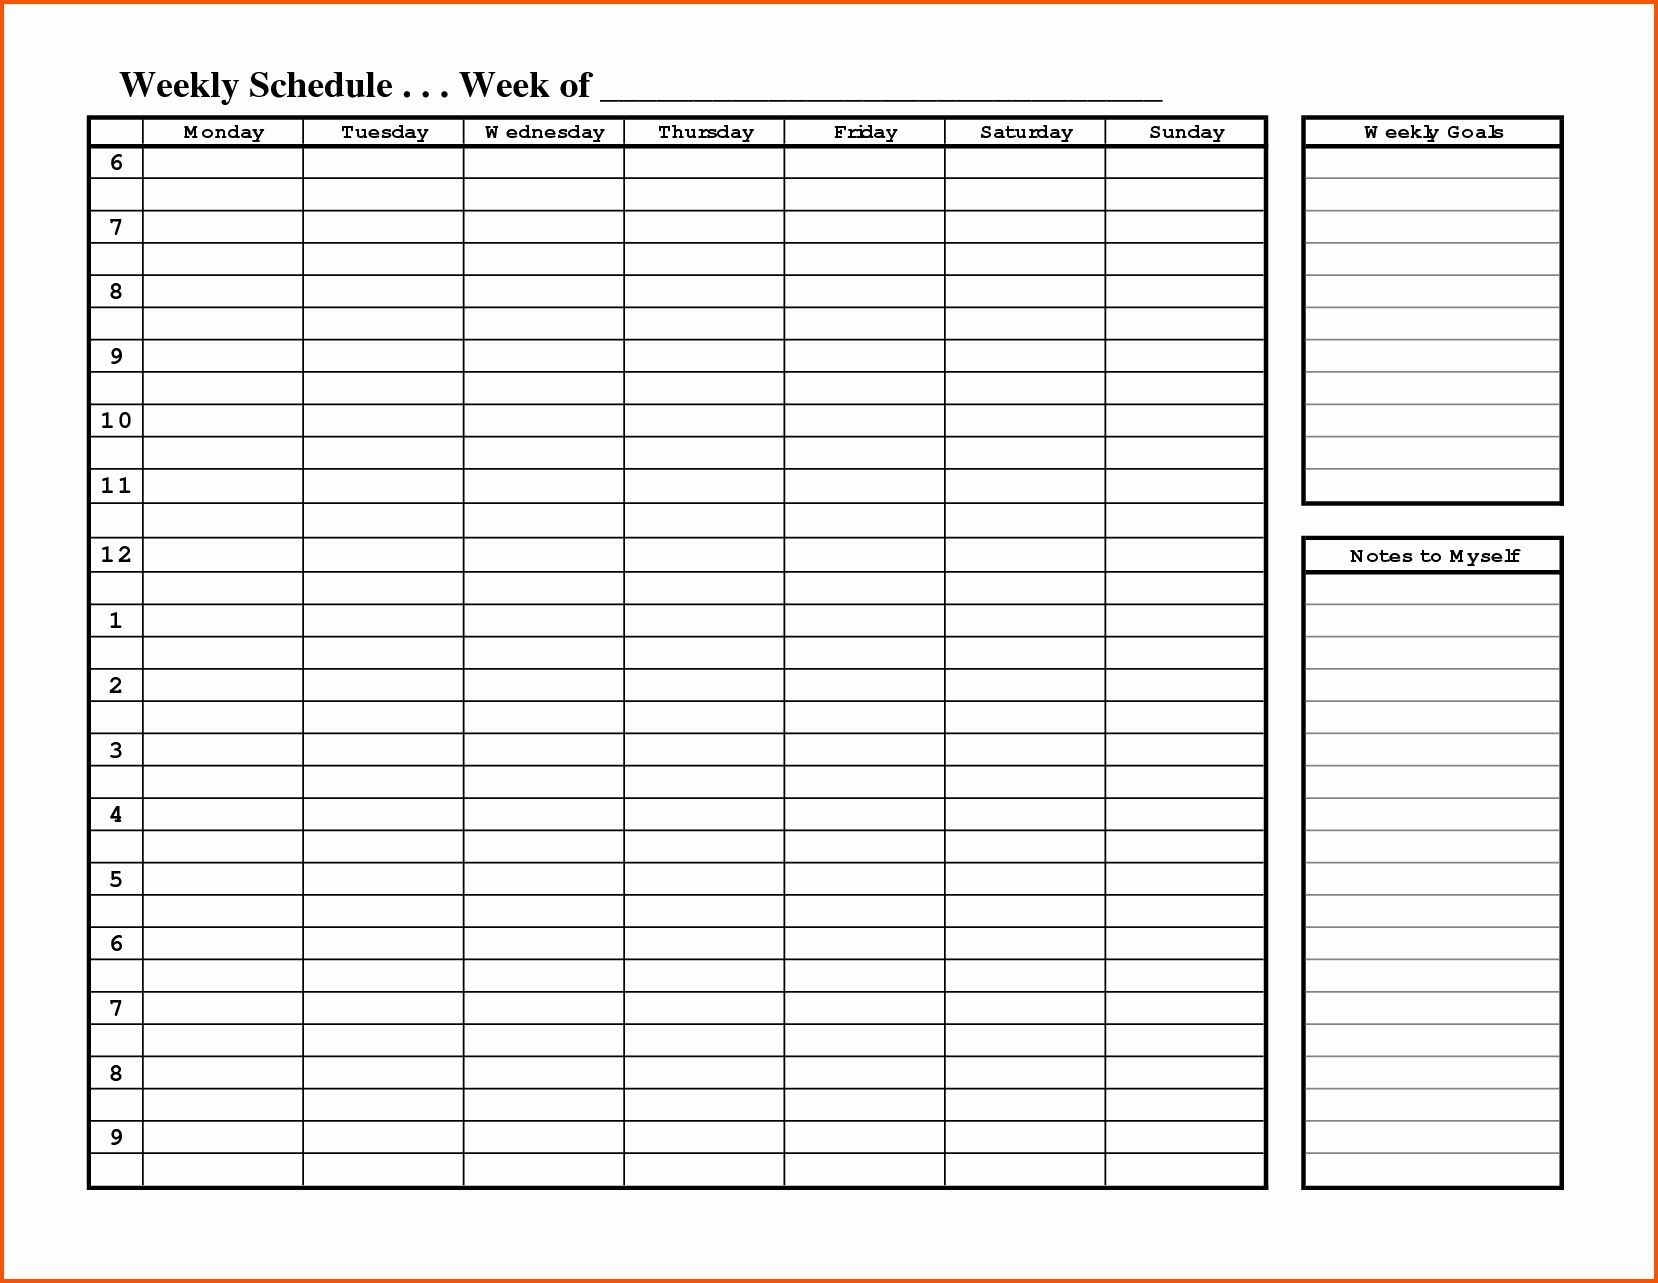 Weekly Hourly Planner Template Word | Weekly Schedule, Daily